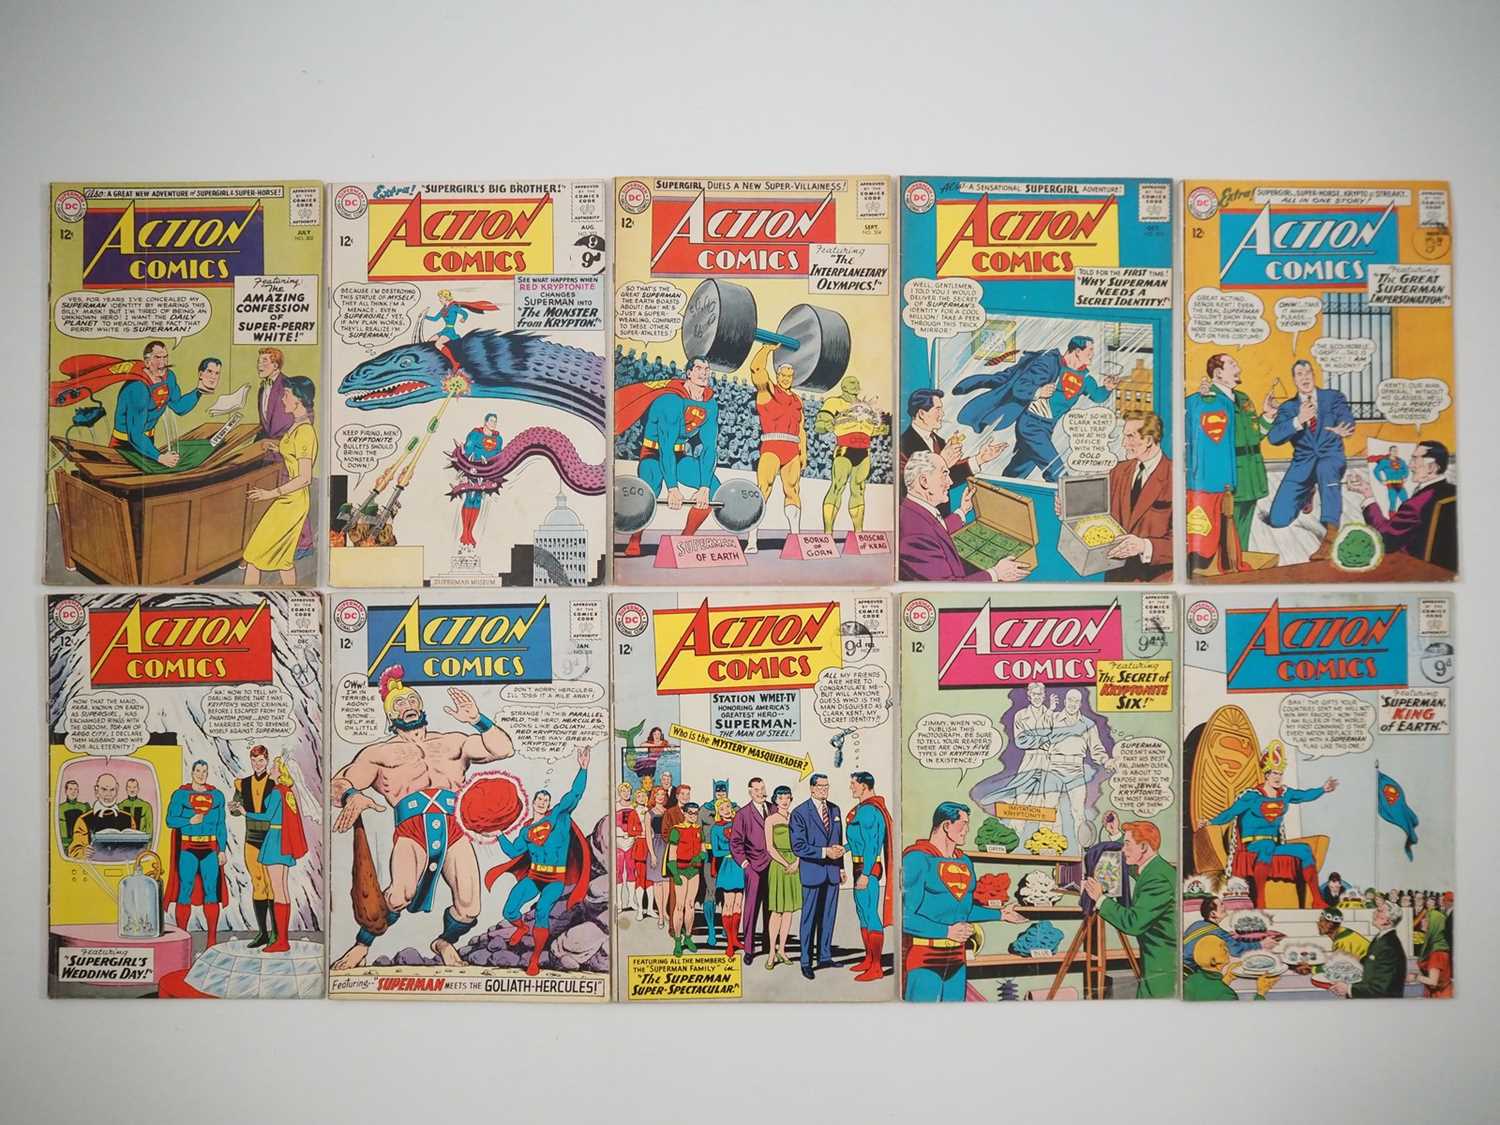 ACTION COMICS #302, 303, 304, 305, 306, 307, 308, 309, 310, 311 (10 in Lot) - (1963/1964 - DC) -